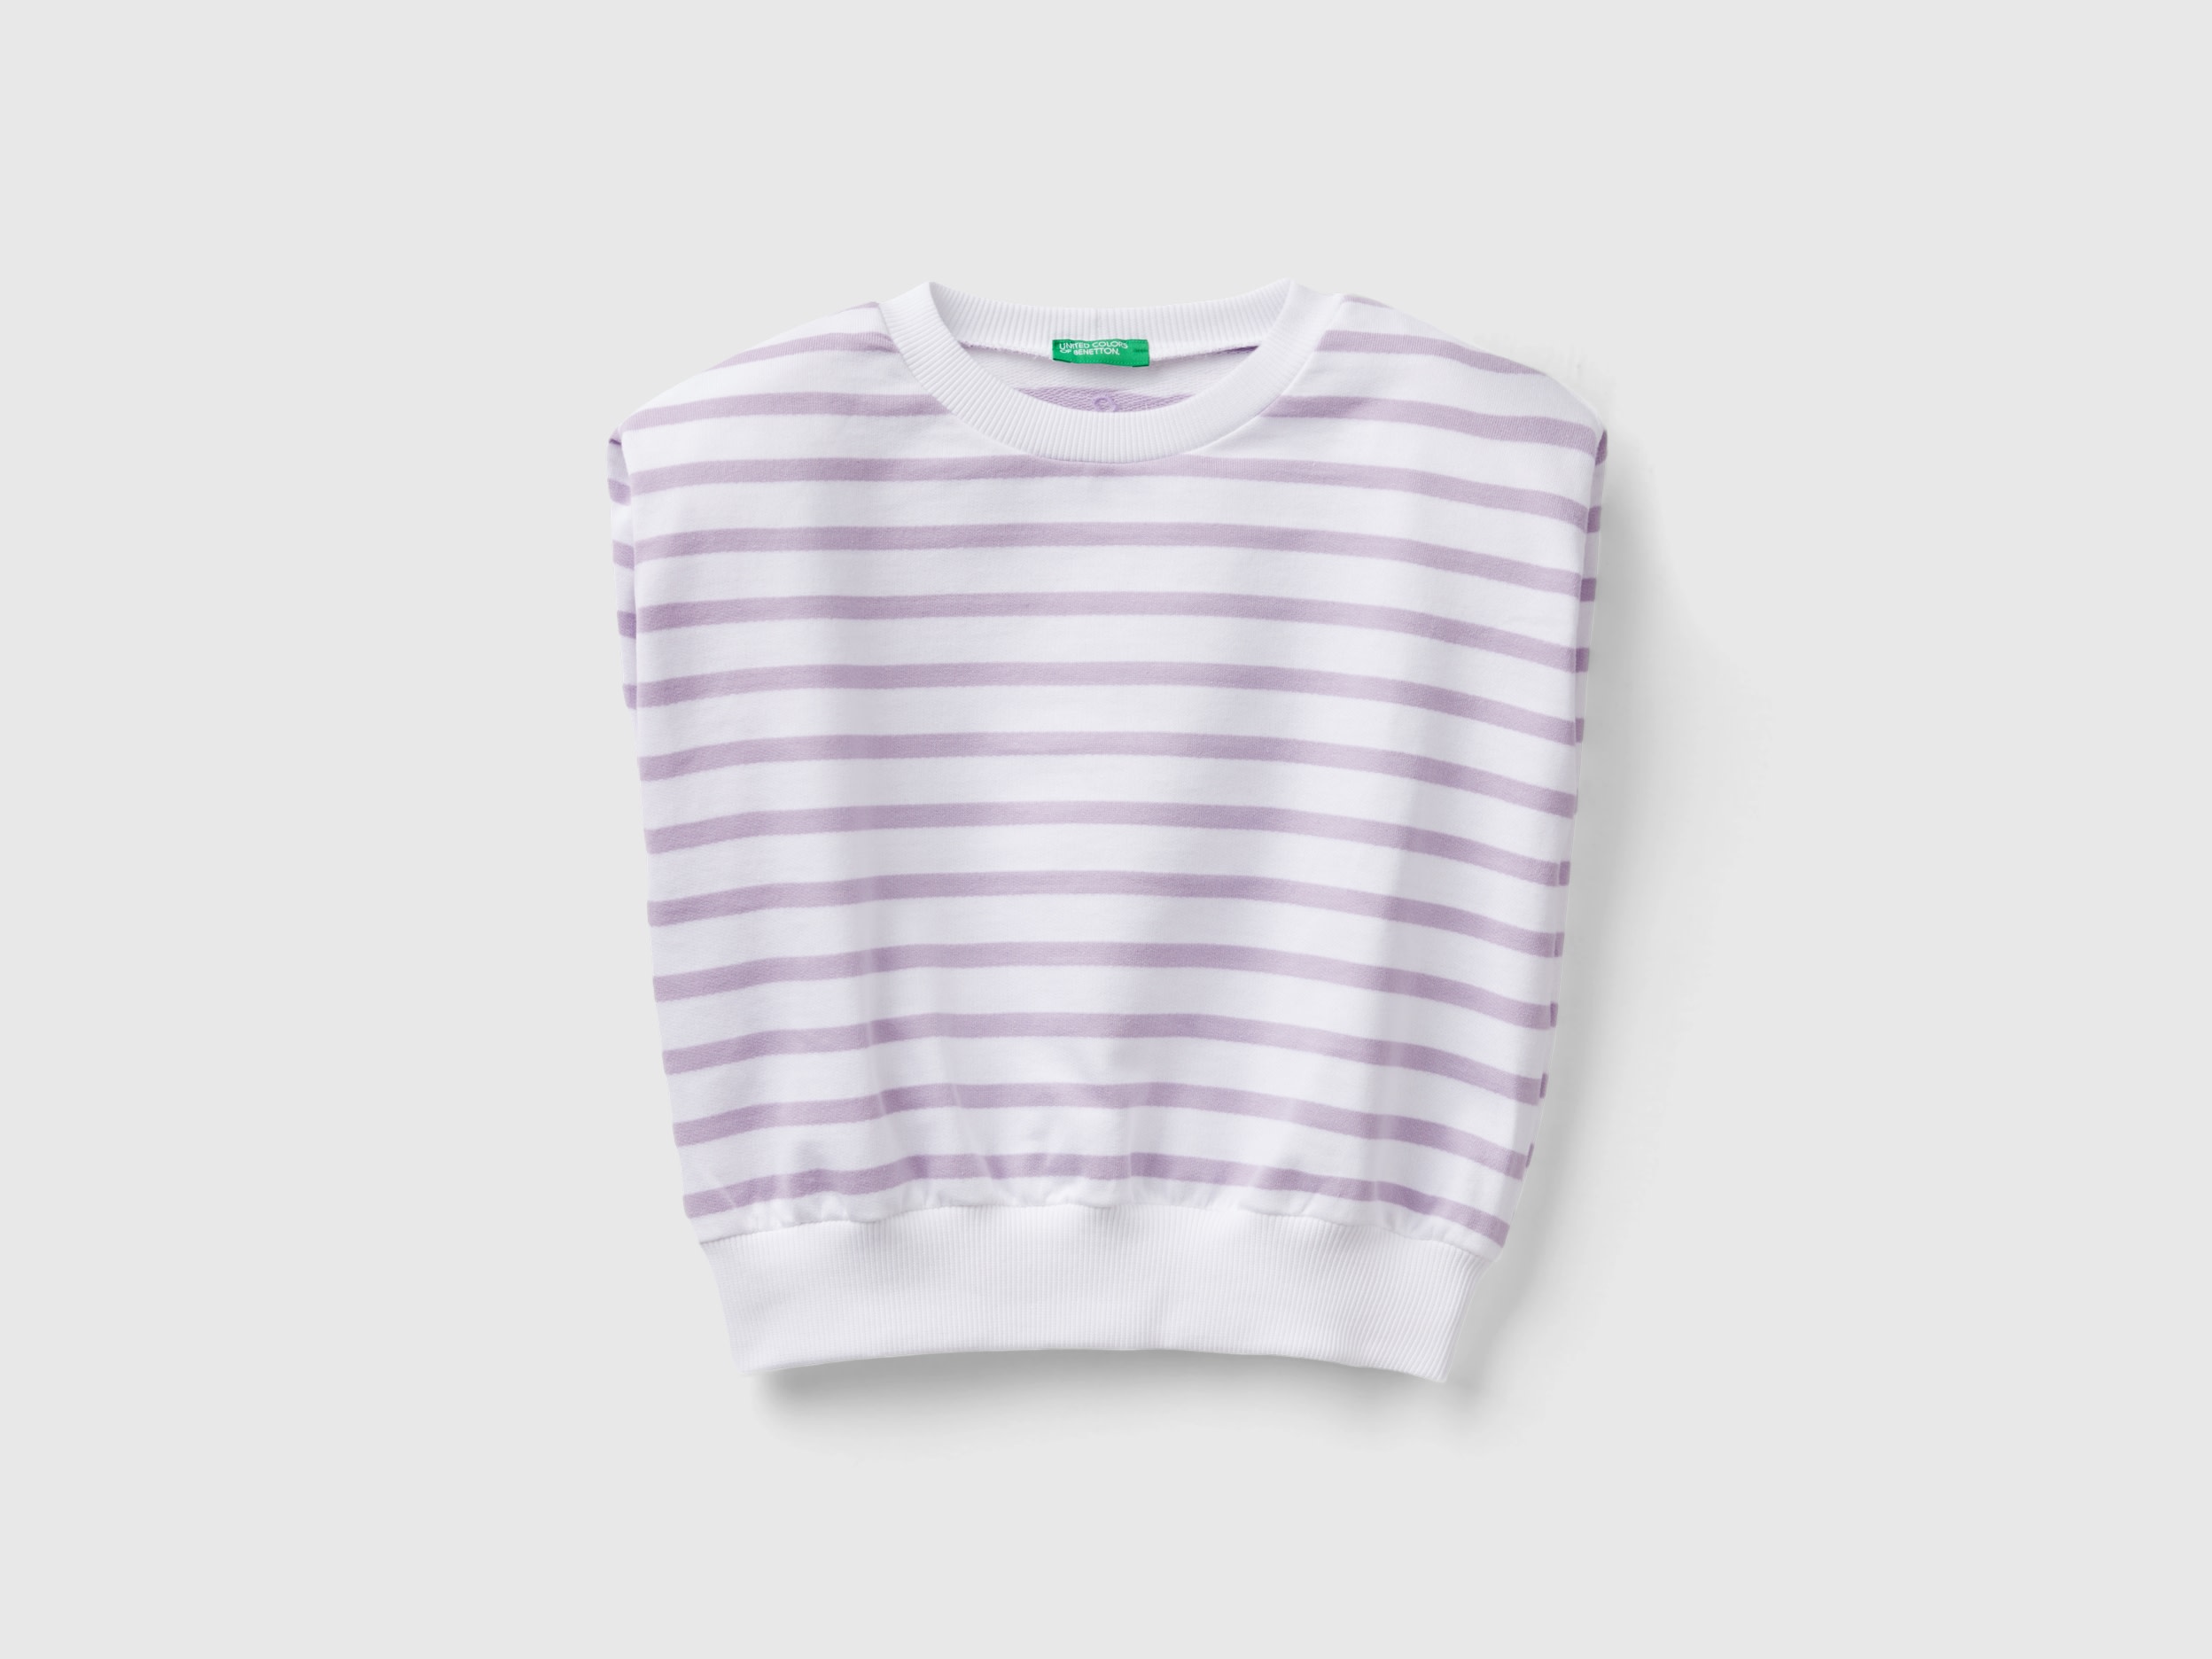 Benetton, Striped Top In Sweat Fabric, size 2XL, Lilac, Kids